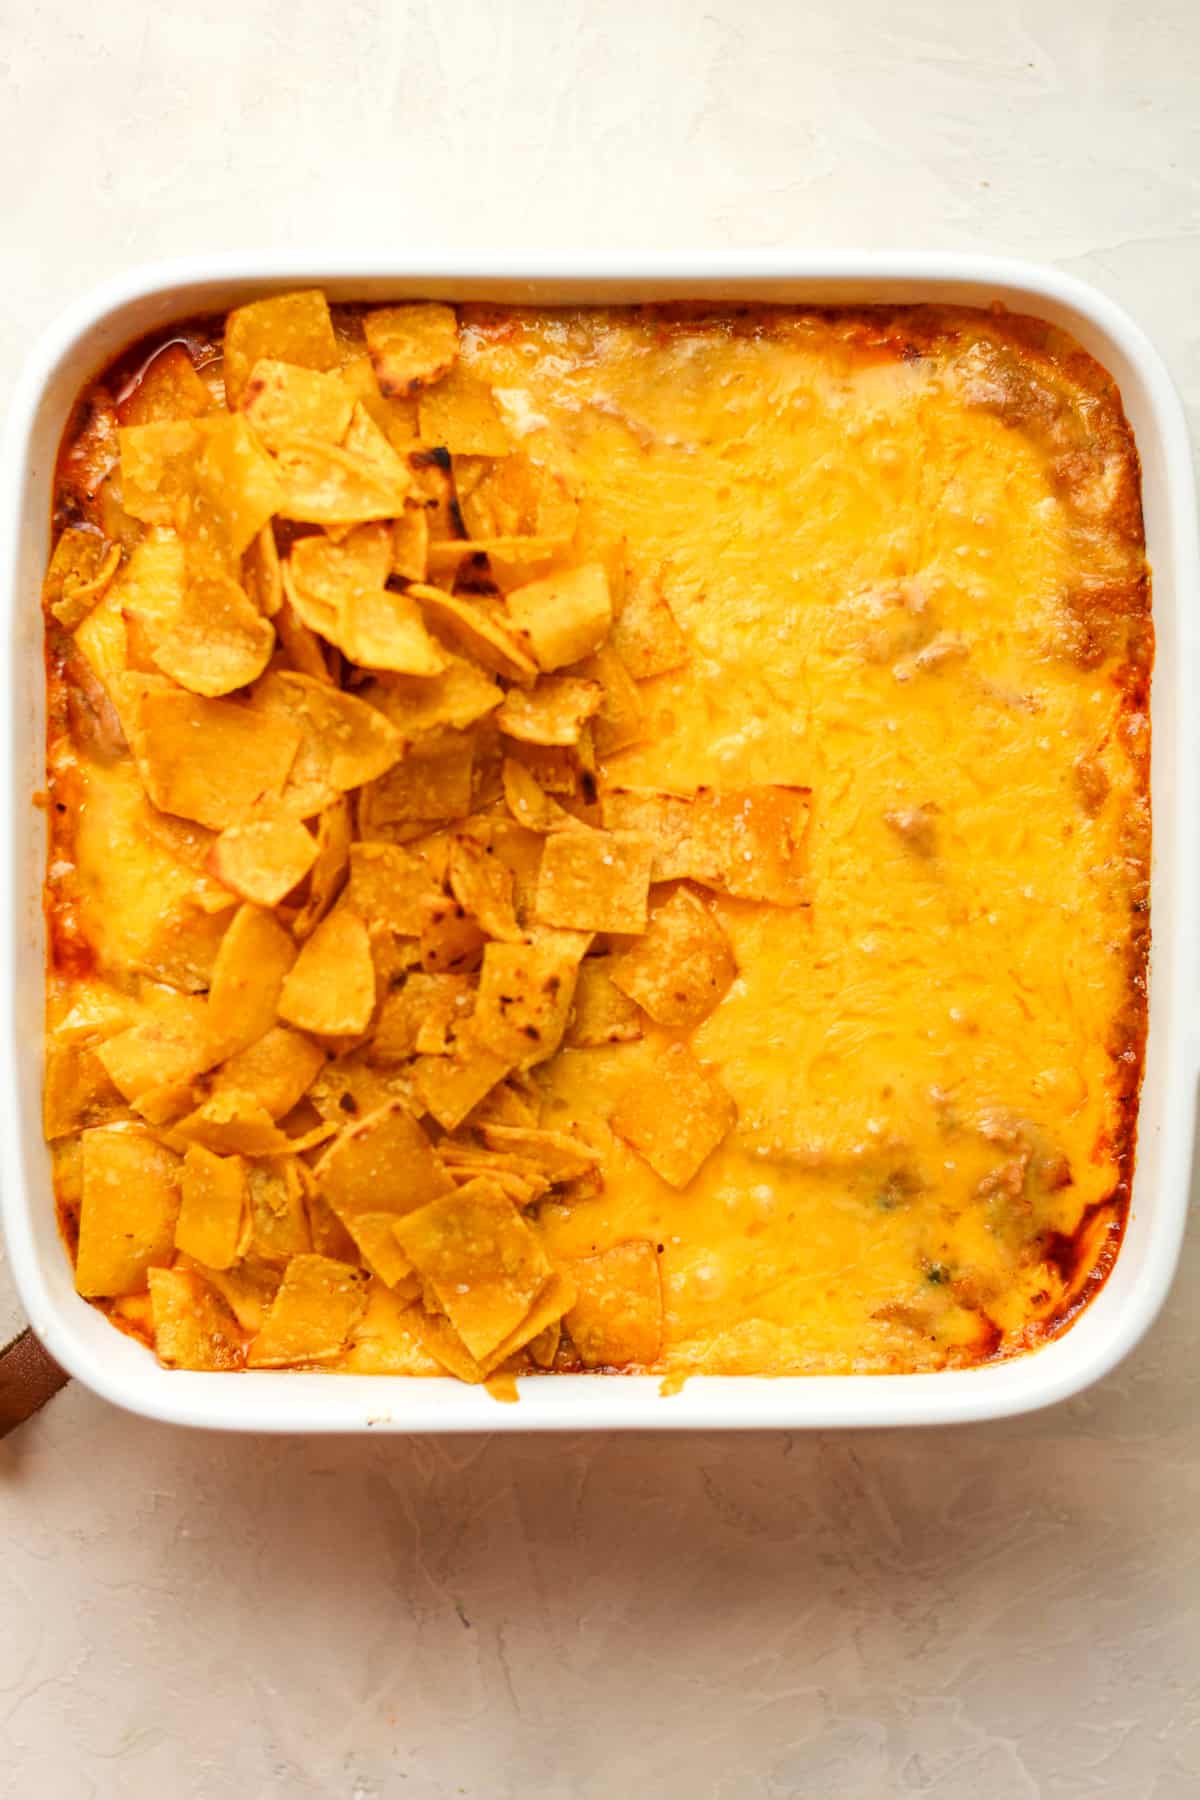 A dish of the casserole with melted cheese on top and some of the sautéed corn tortillas.